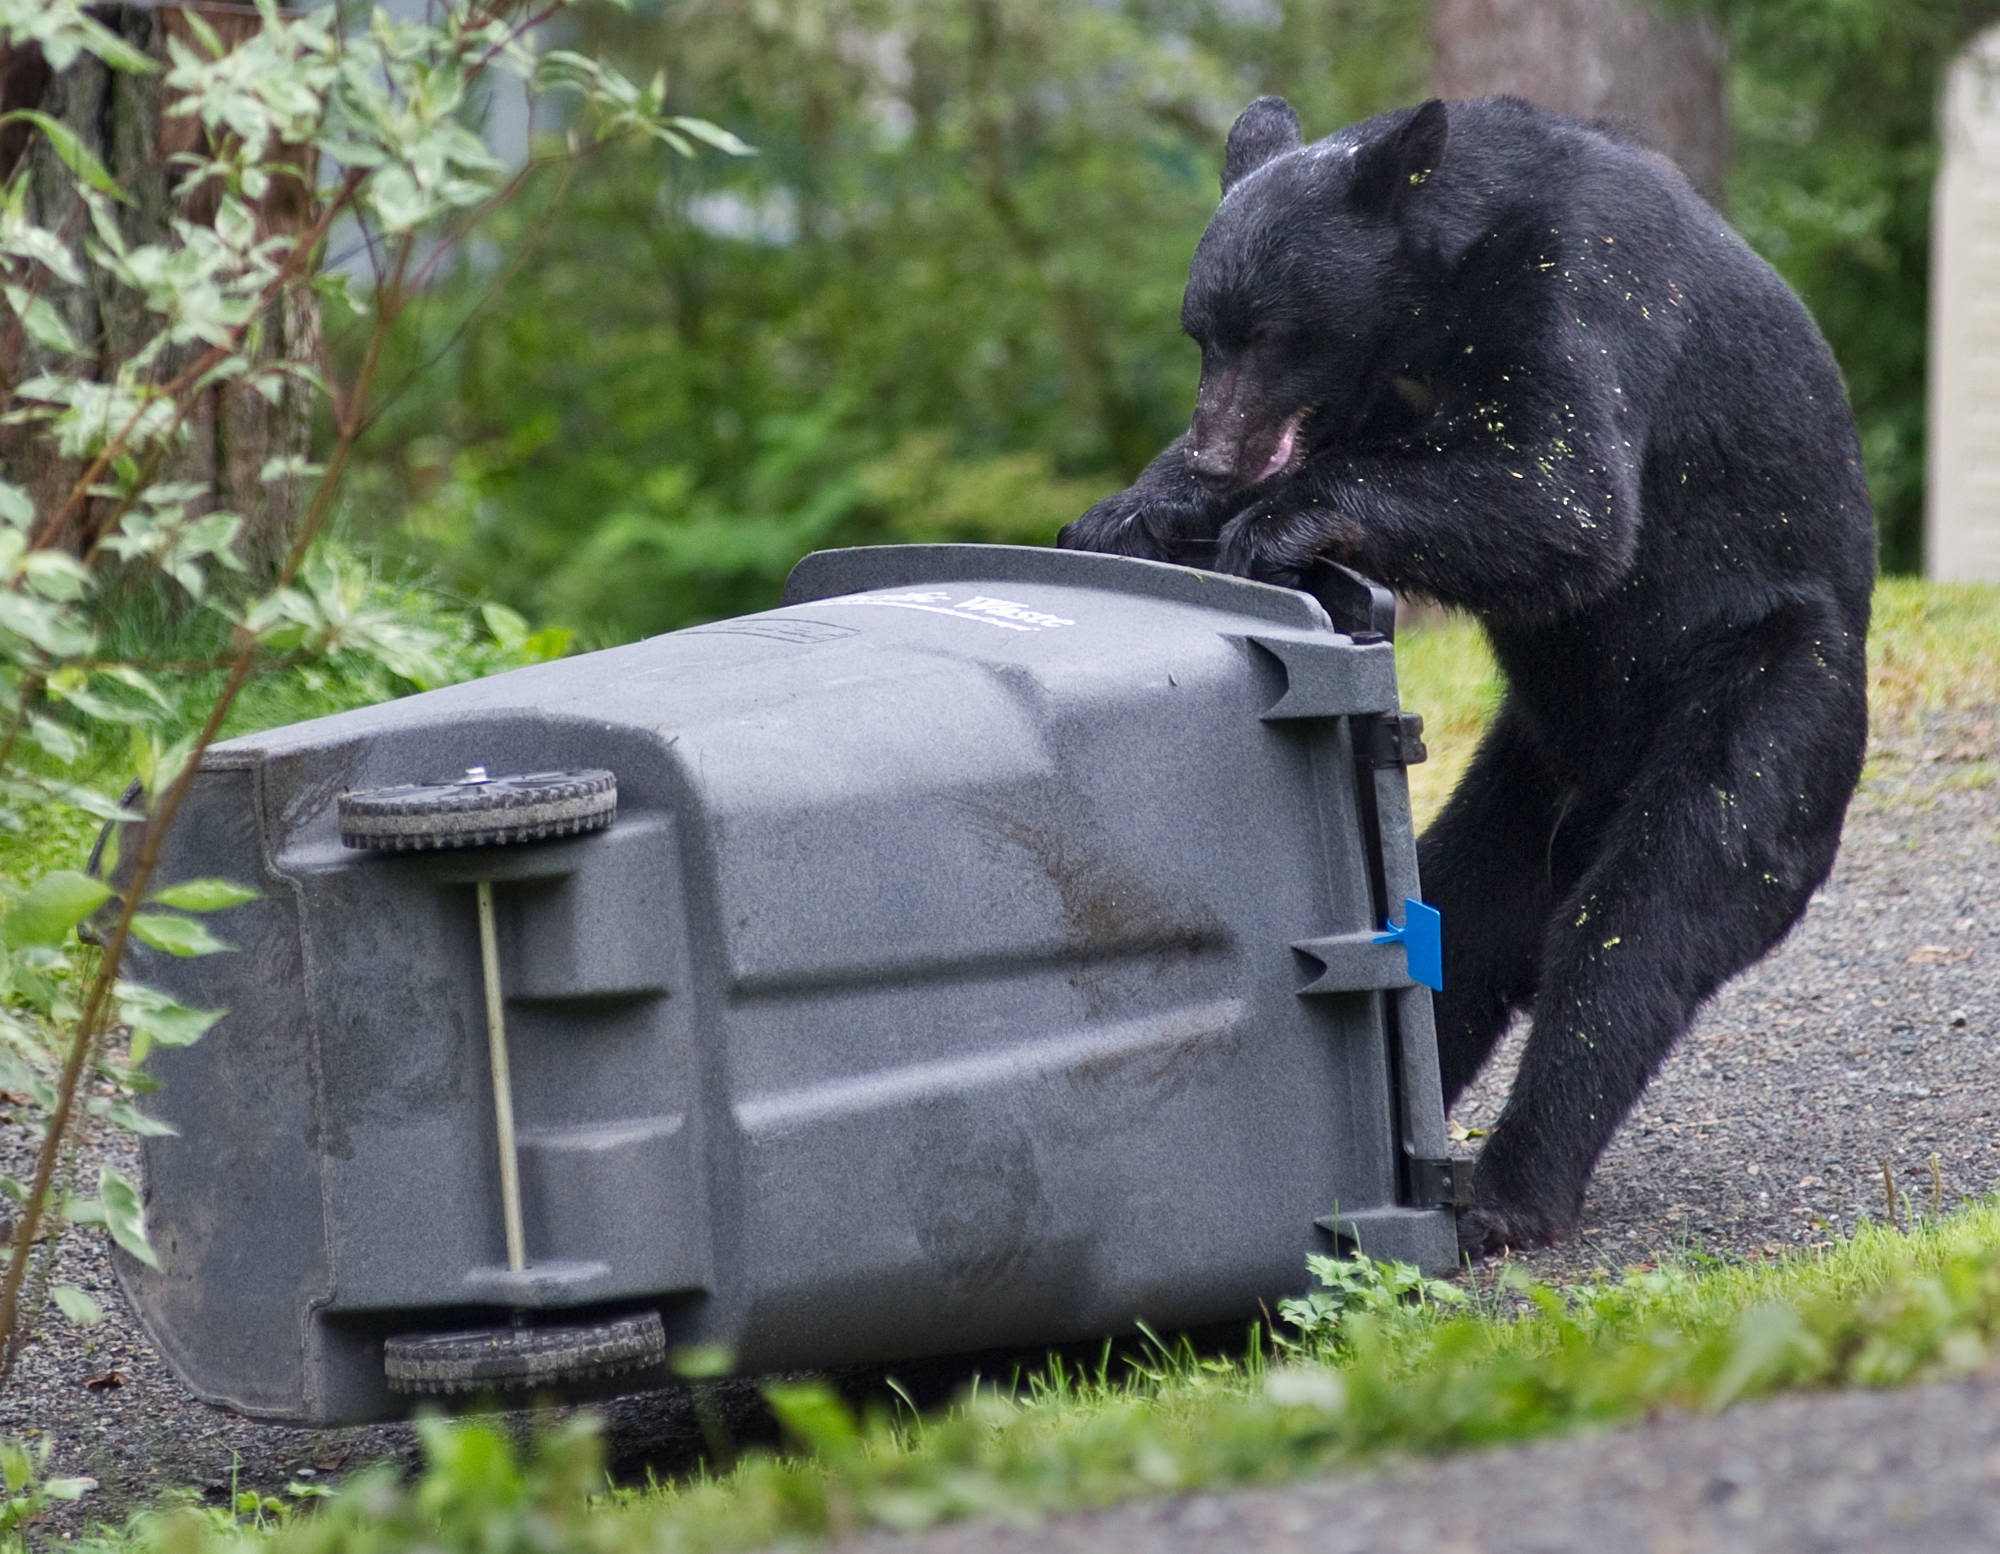 A black bear sow attempts to open a Pacific Waste garbage container in the Bonnie Brae subdivision on Douglas Island in July 2013. Water and wasted service won’t be discontinued for Juneauites in light of the ongoing pandemic. (Michael Penn | Juneau Empire file)